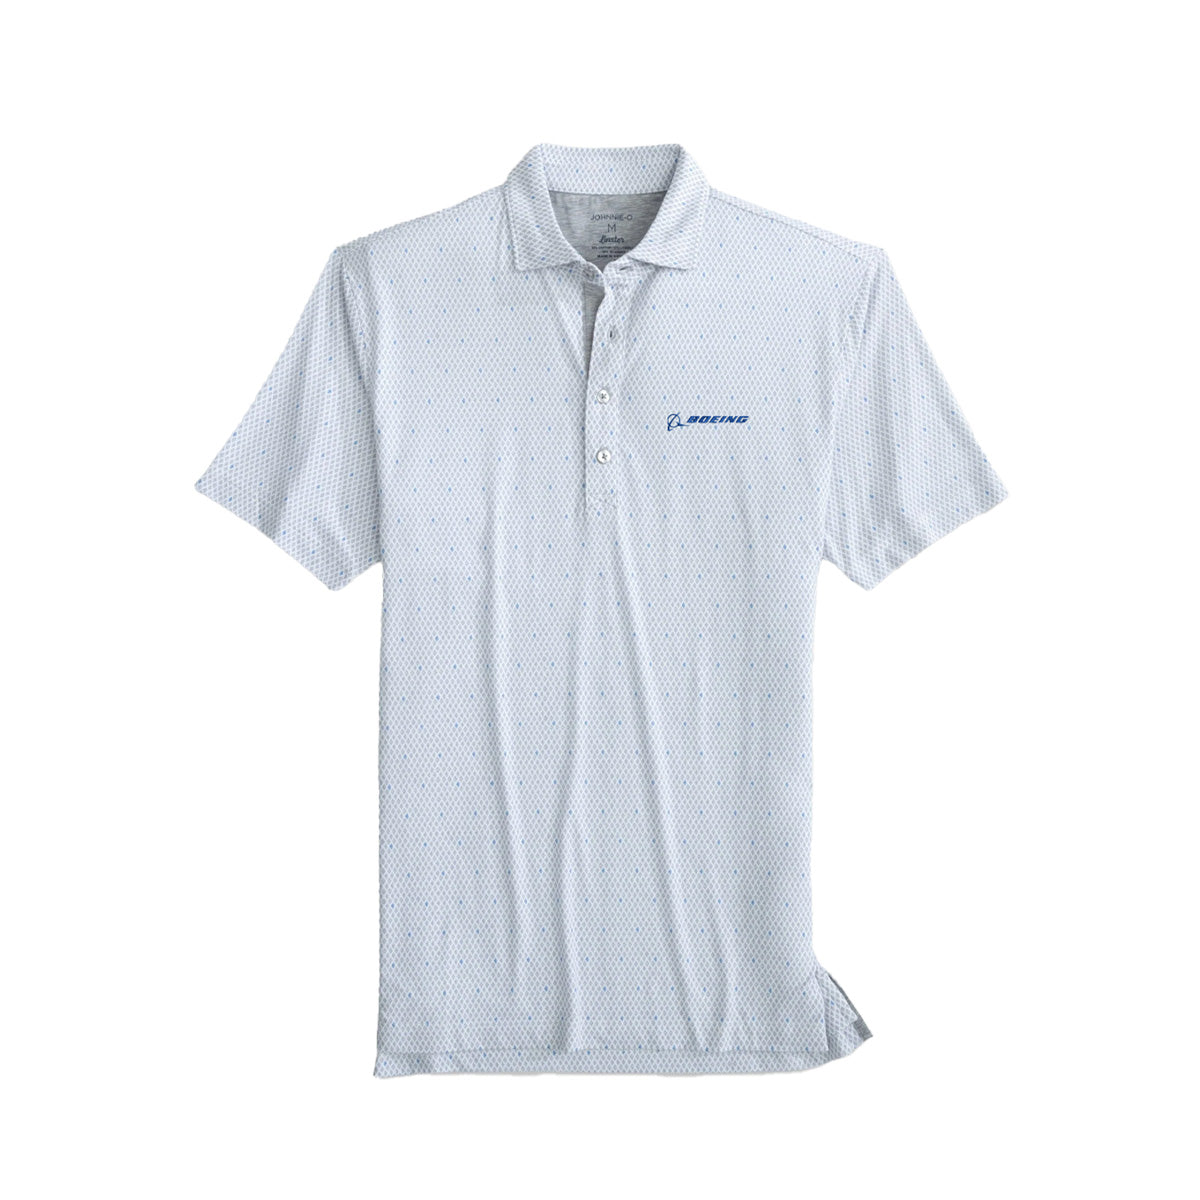 Full product image of the polo in white color with blue dots all over.  Blue Boeing signature logo on left chest.  Featuring 4 buttons.